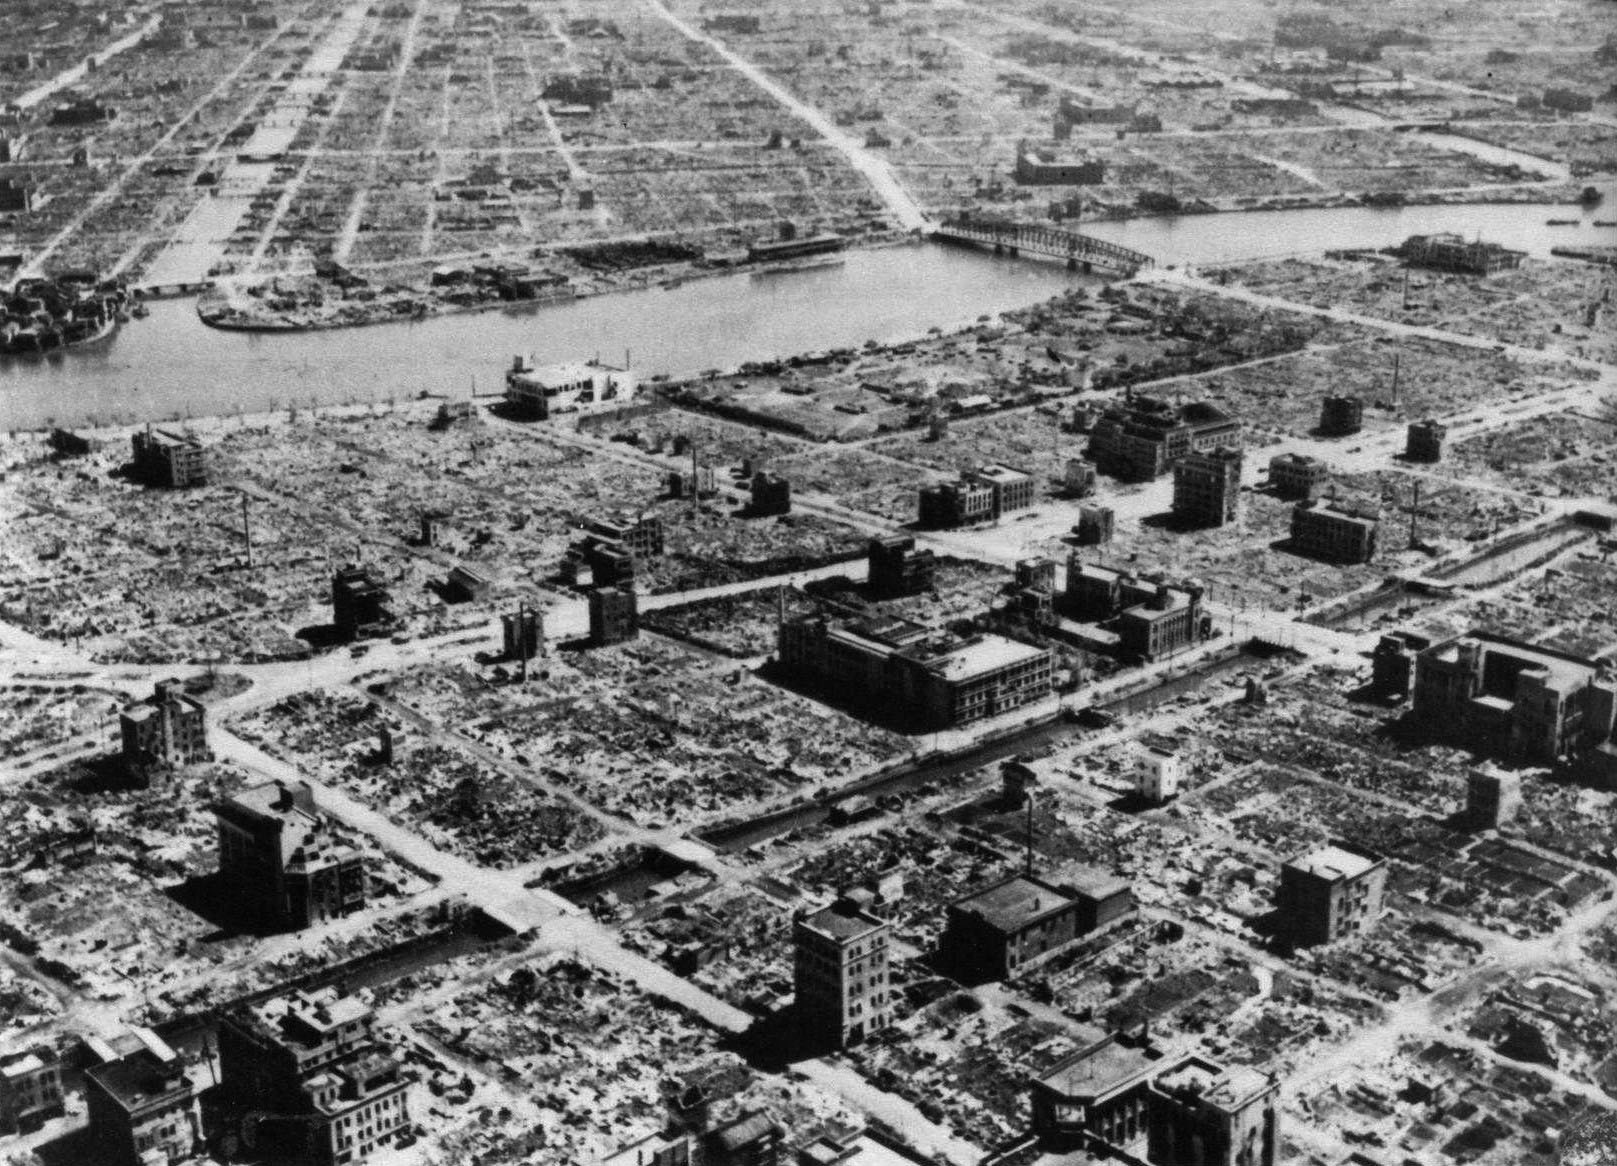 Firebombing of Tokyo March 9th 1945 was the most destructive bombing raid in human history. u/KC-Slider